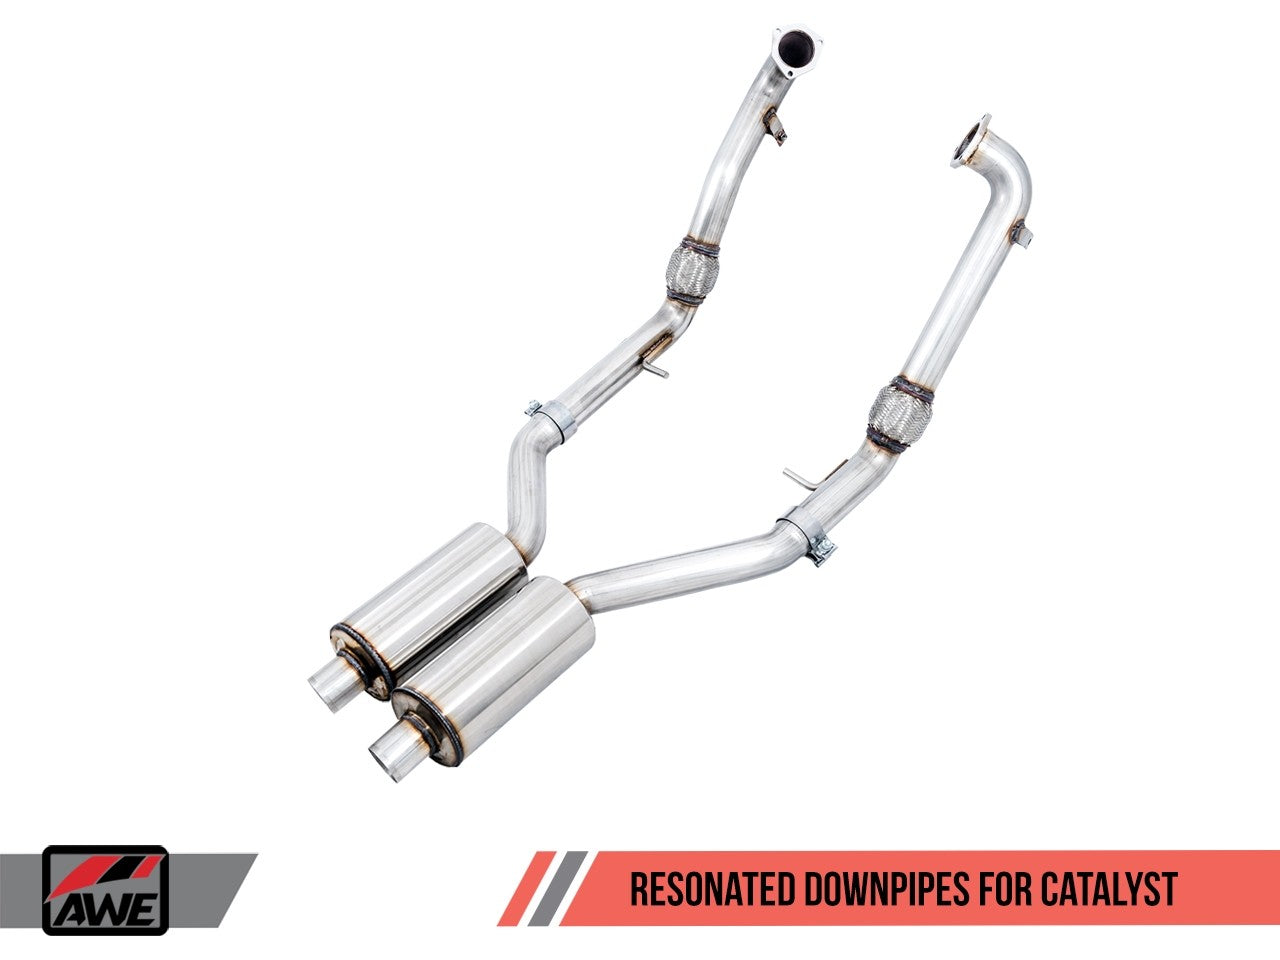 AWE Touring Edition Exhaust for B9 S5 Coupe - Resonated for Performance Catalyst - Motorsports LA